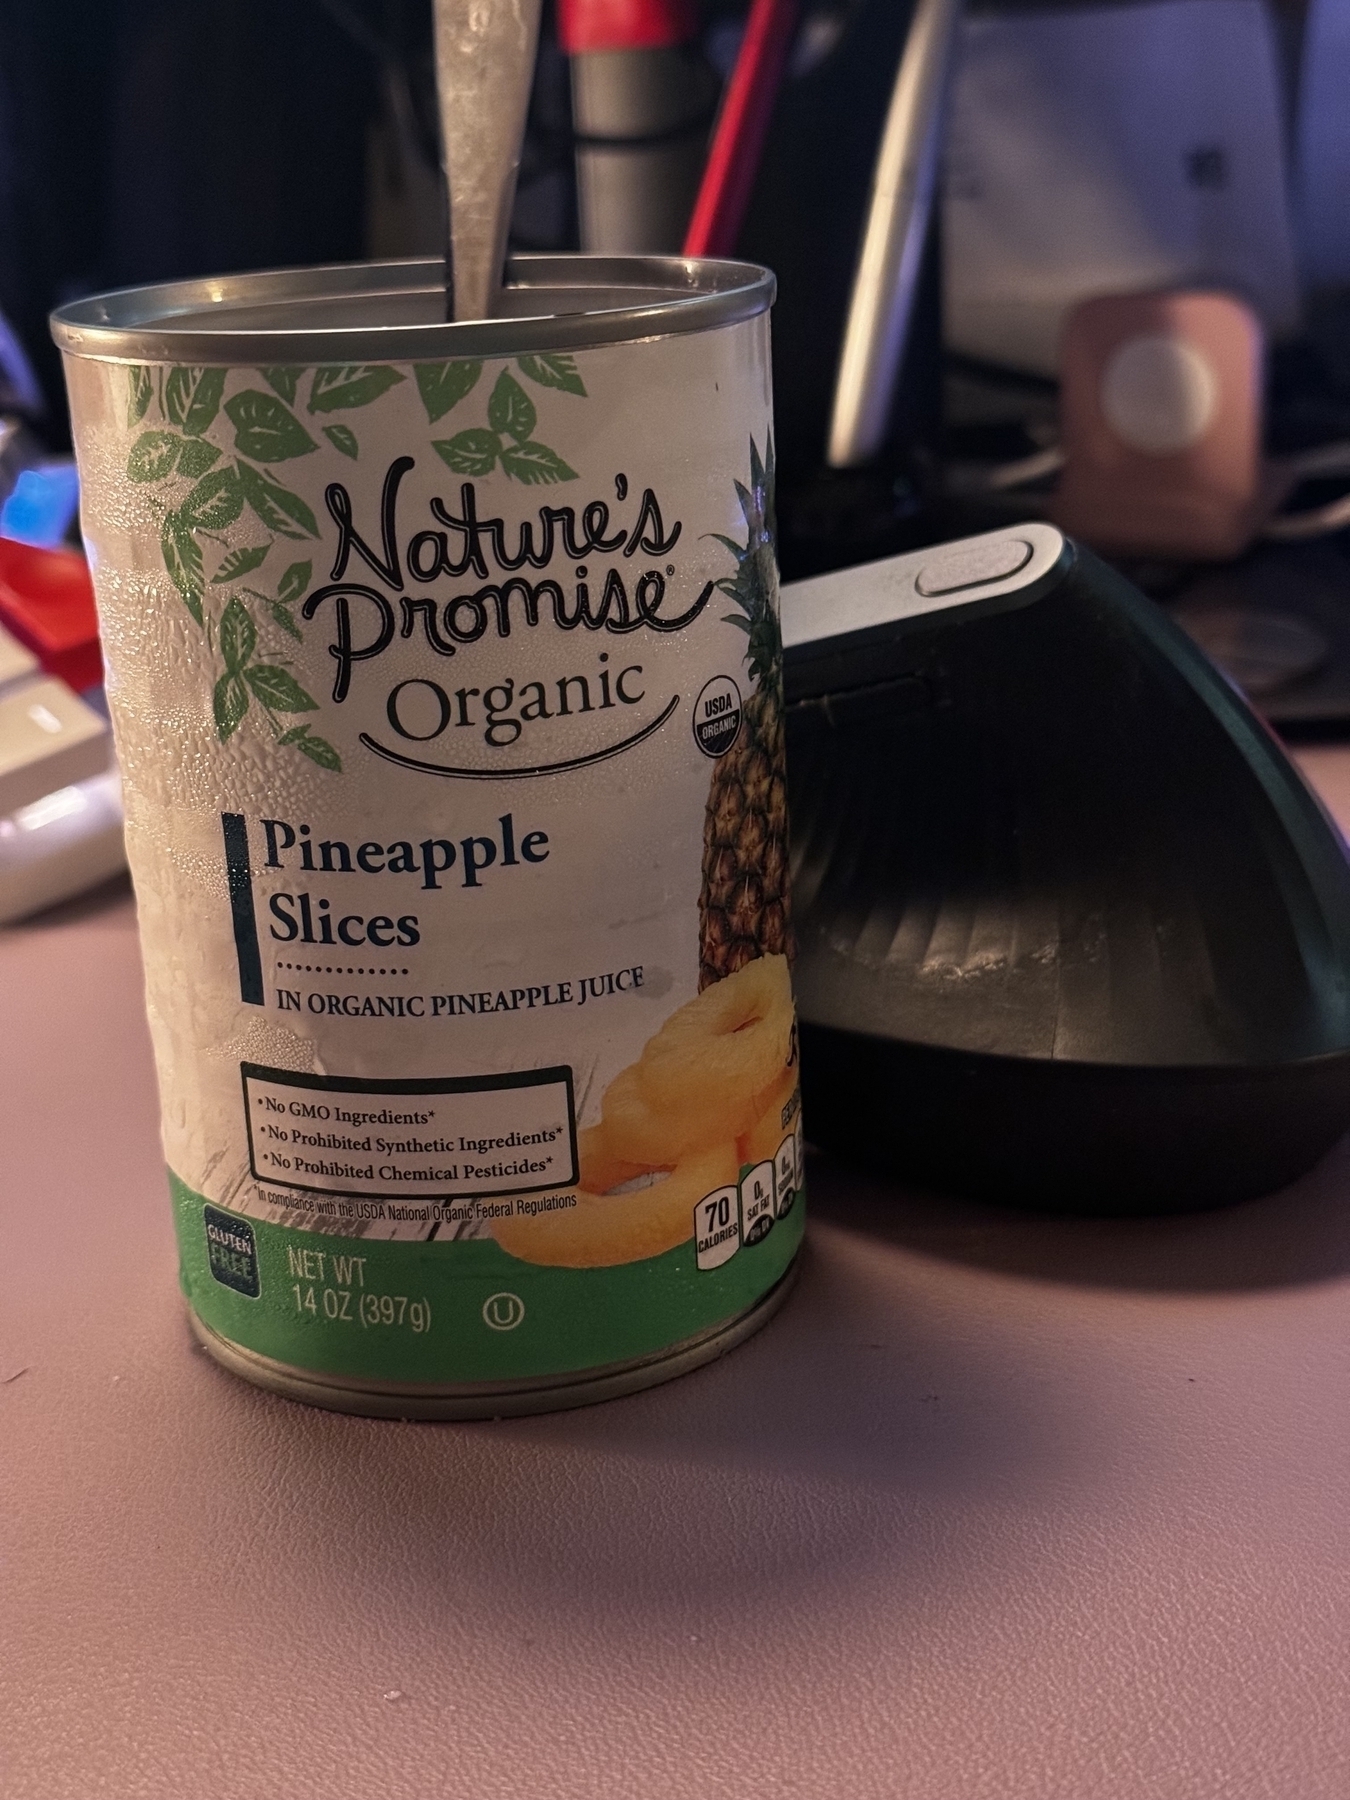 A can of organic natures promise store brand sliced pineapples sat on a lavender desk mat. A grey ergonomic mouse is sat next to it. A utensil is sticking out of the can. 